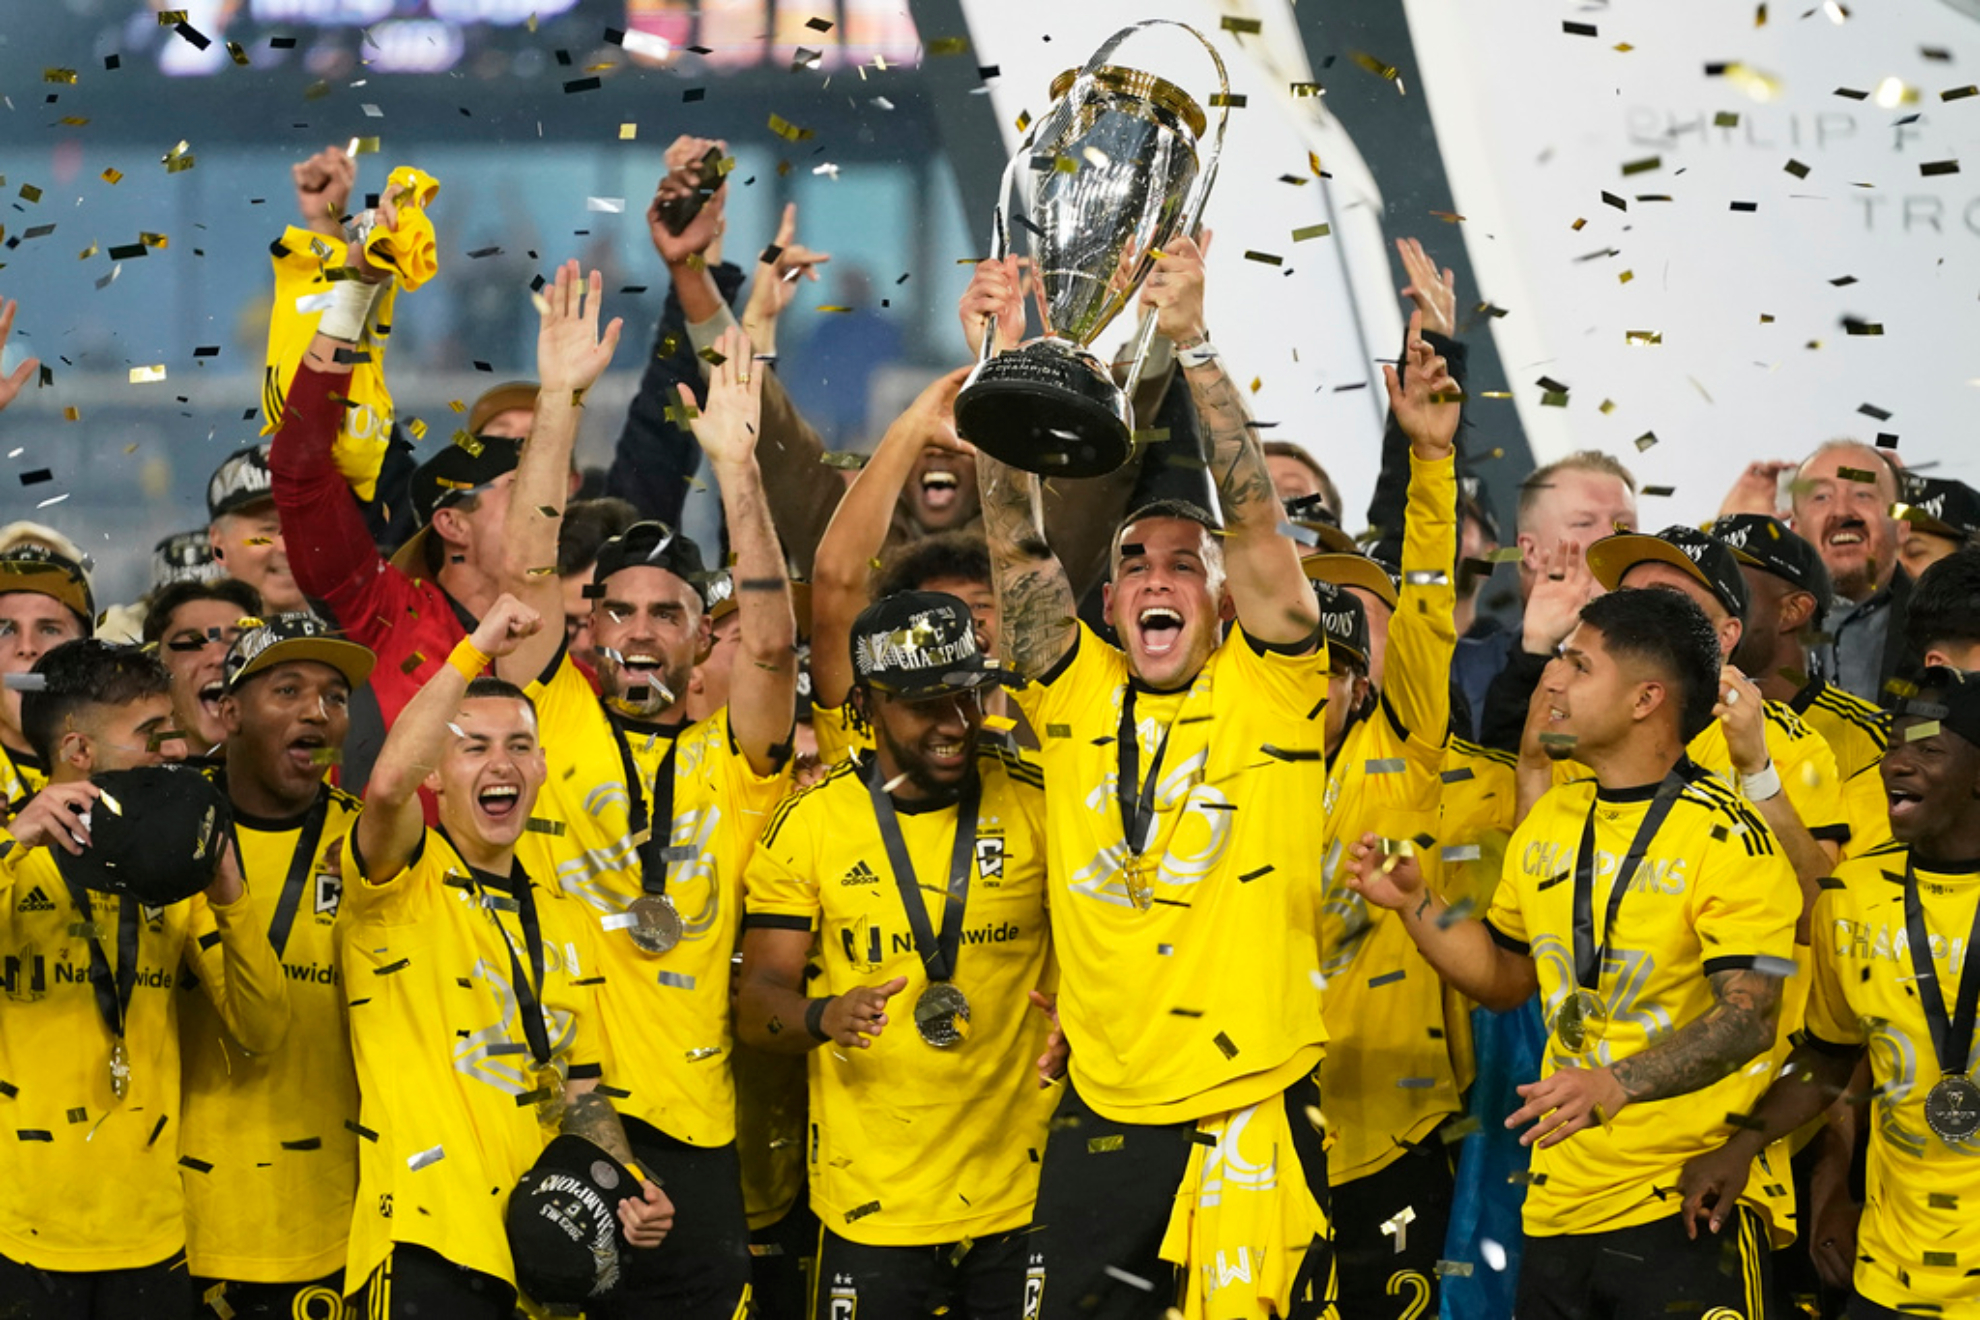 Columbus Crew secures third MLS Cup win with stunning victory over LAFC